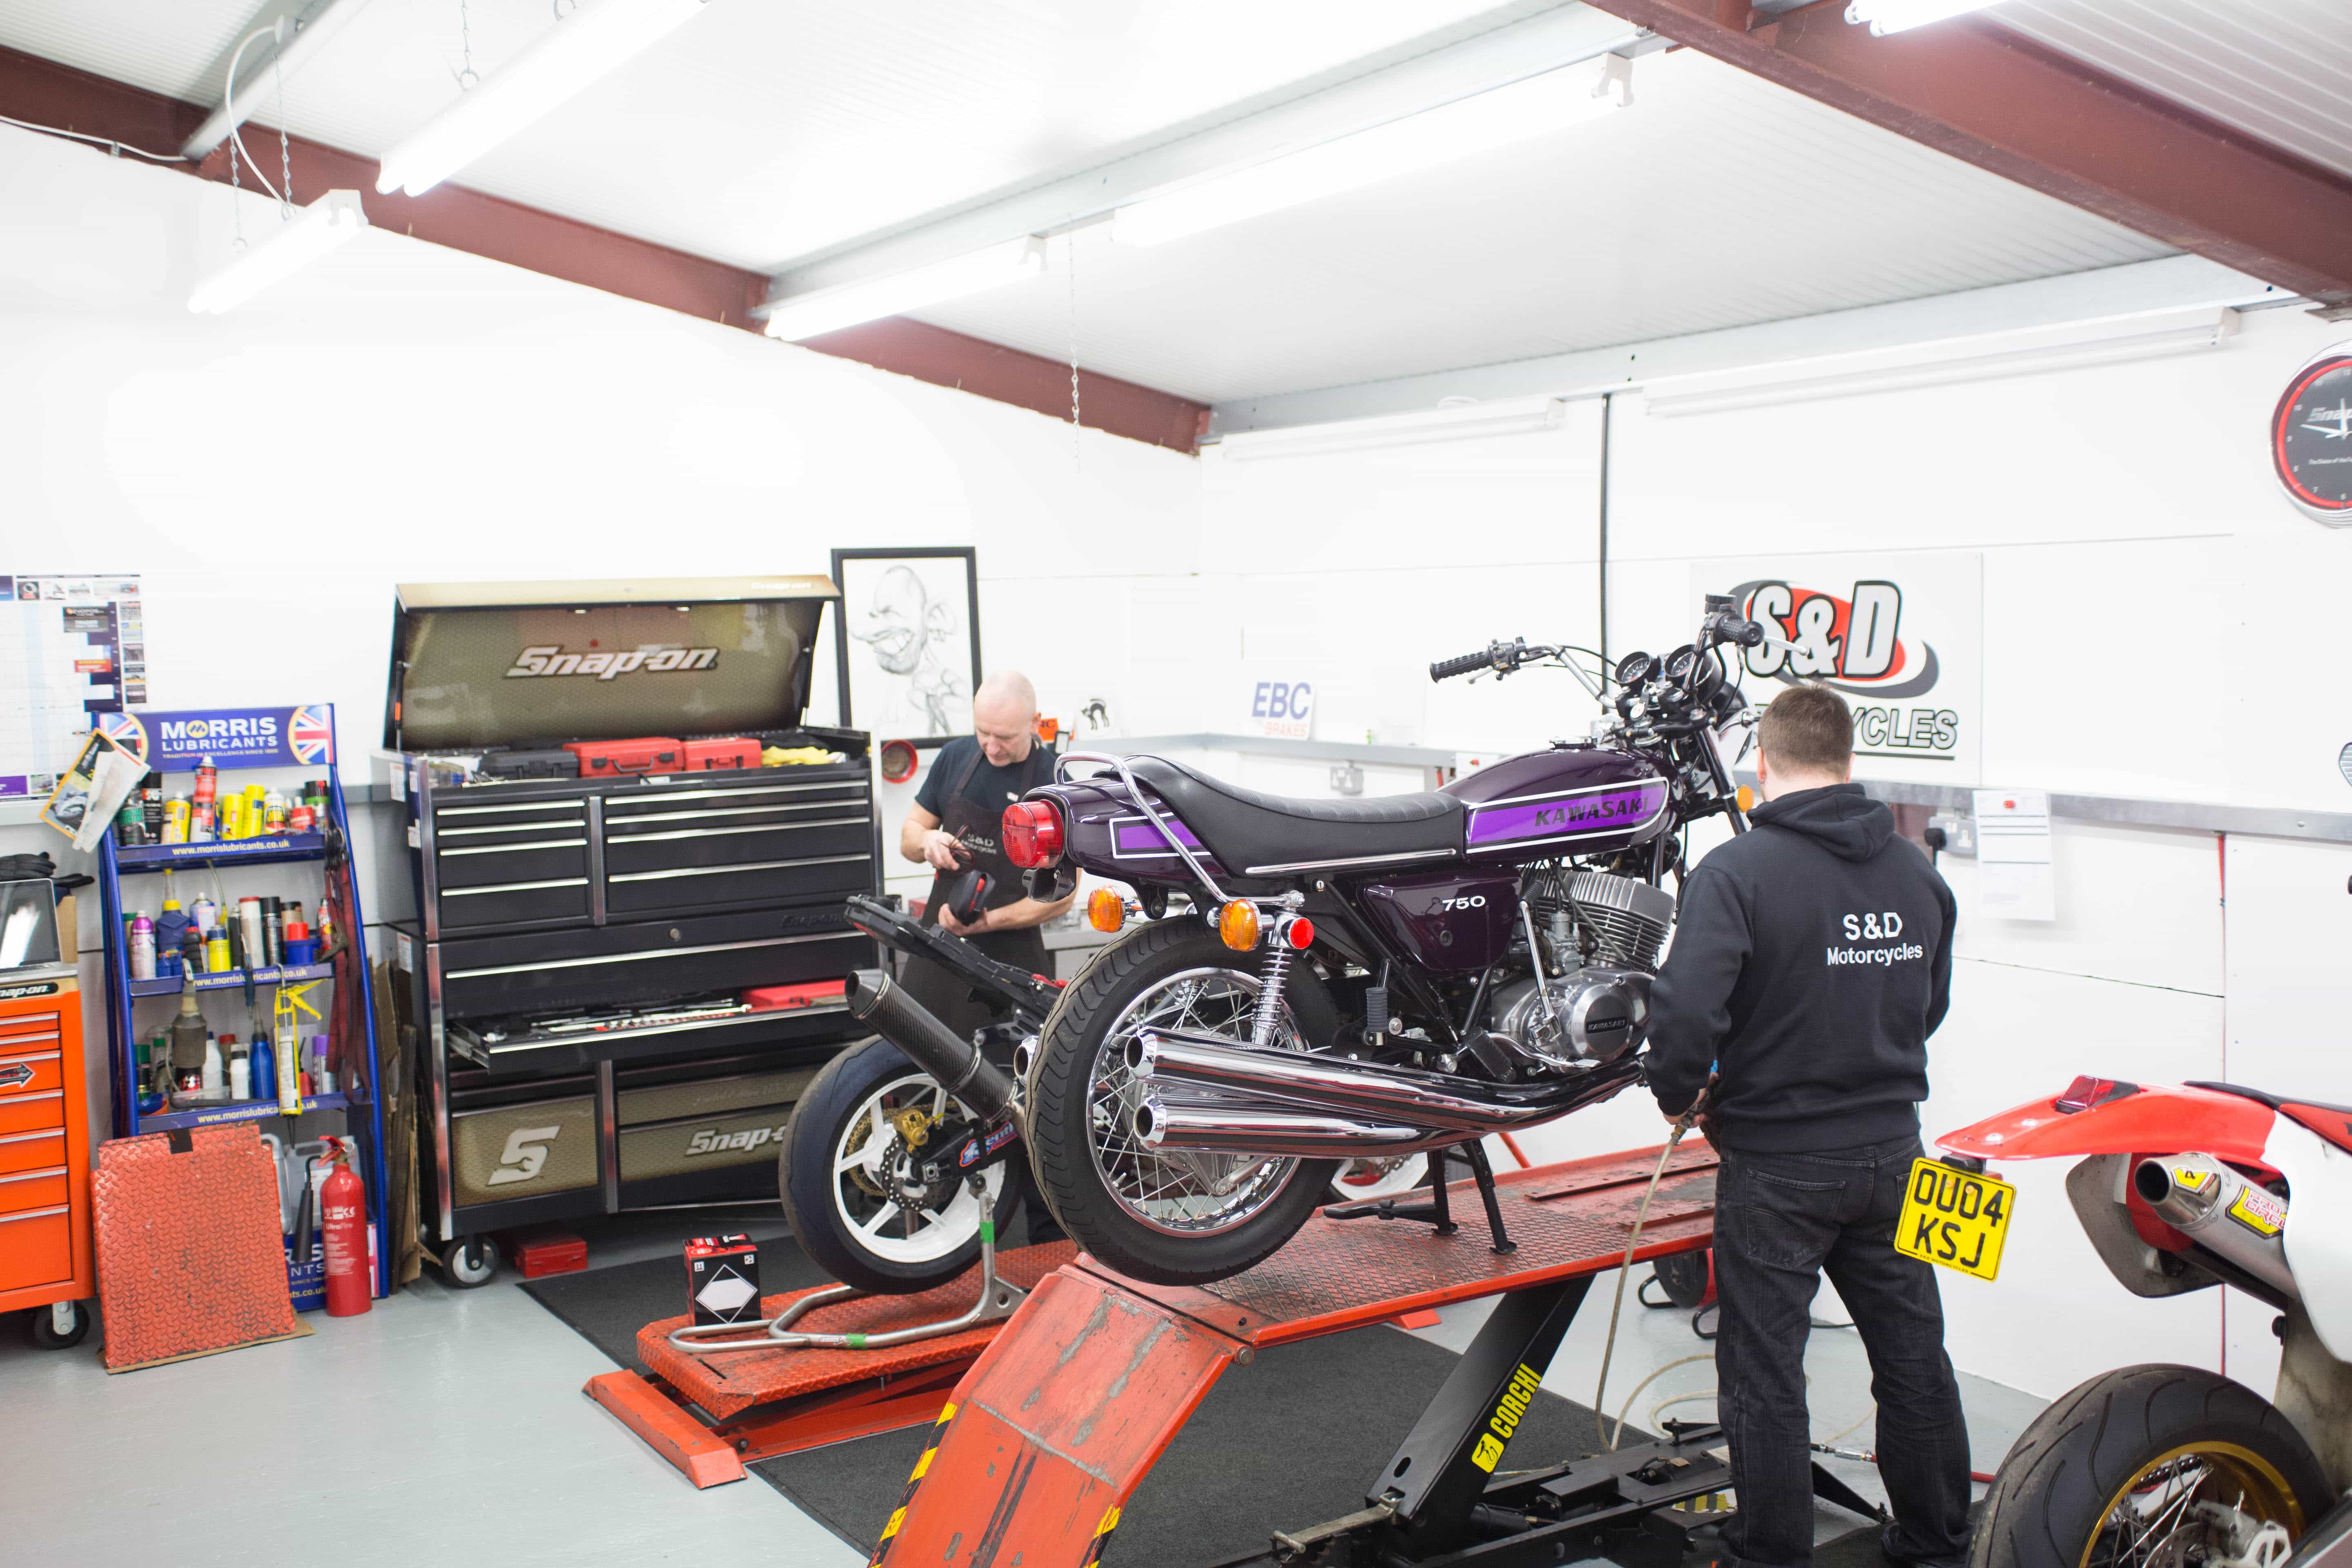 S & D Motorcycles Ltd - Brentwood, UK, motorcycles for sale